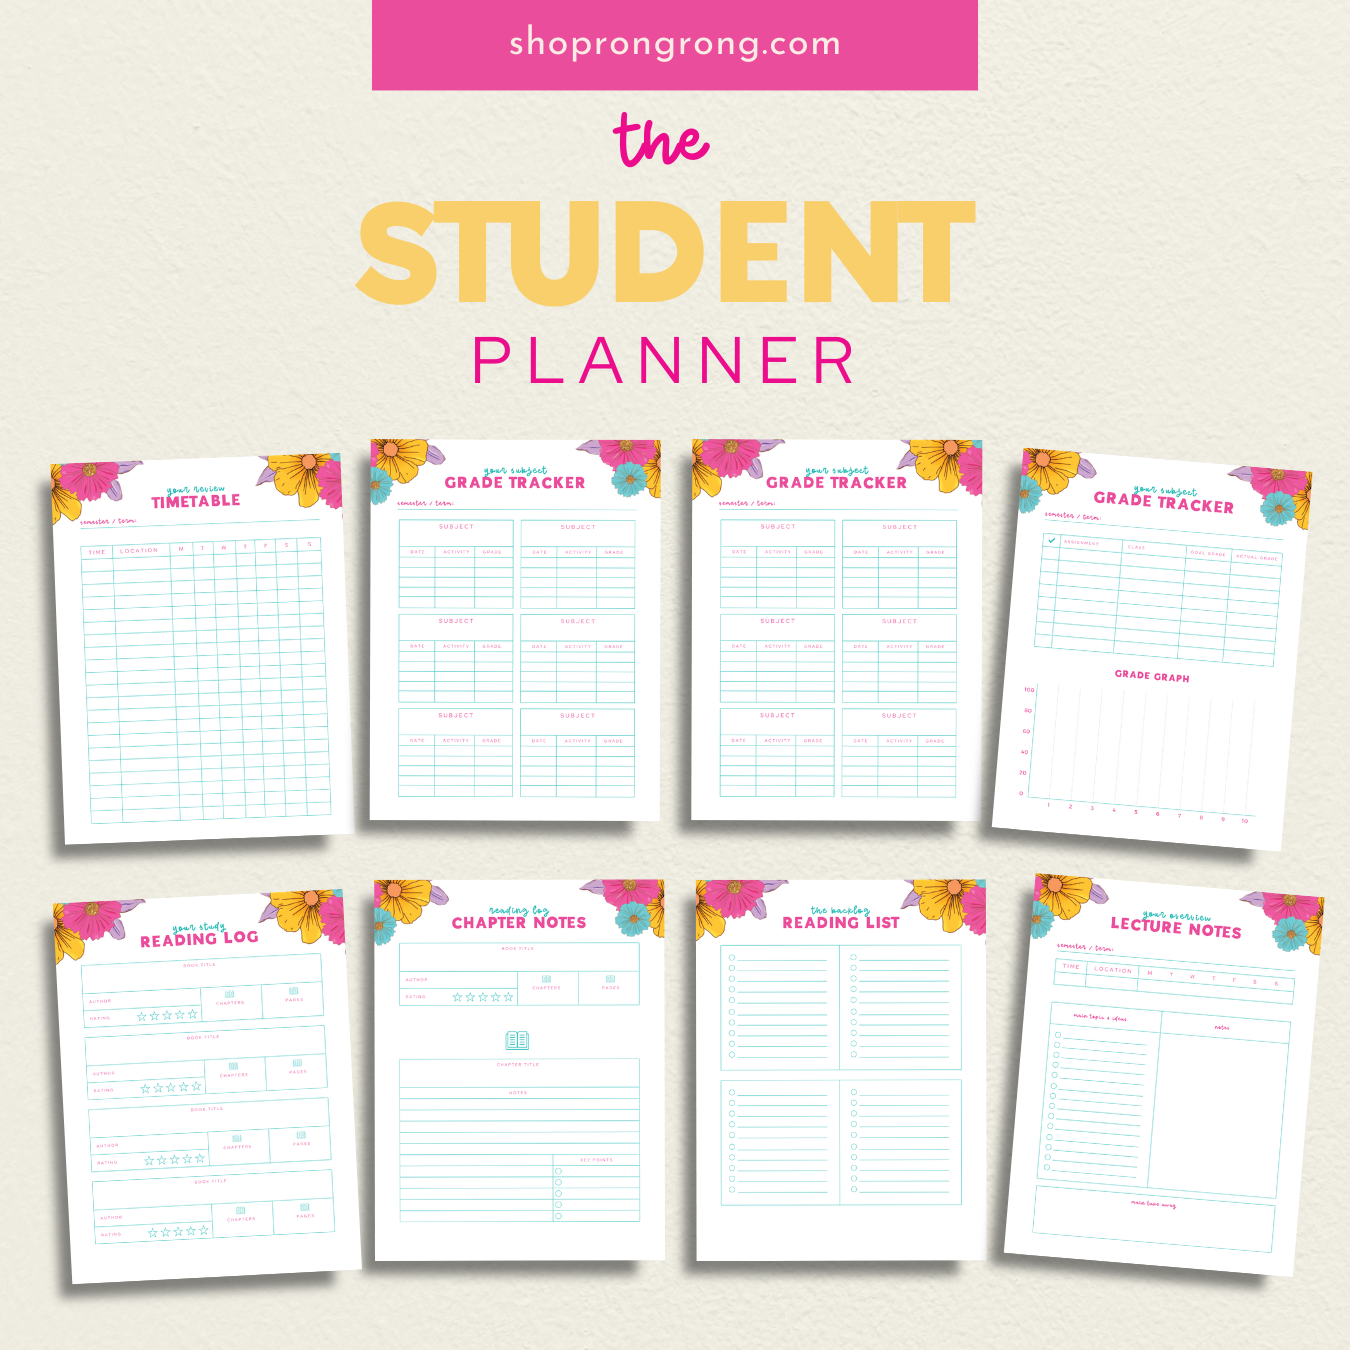 Shop Rongrong The Student Digital Planner for Goodnotes